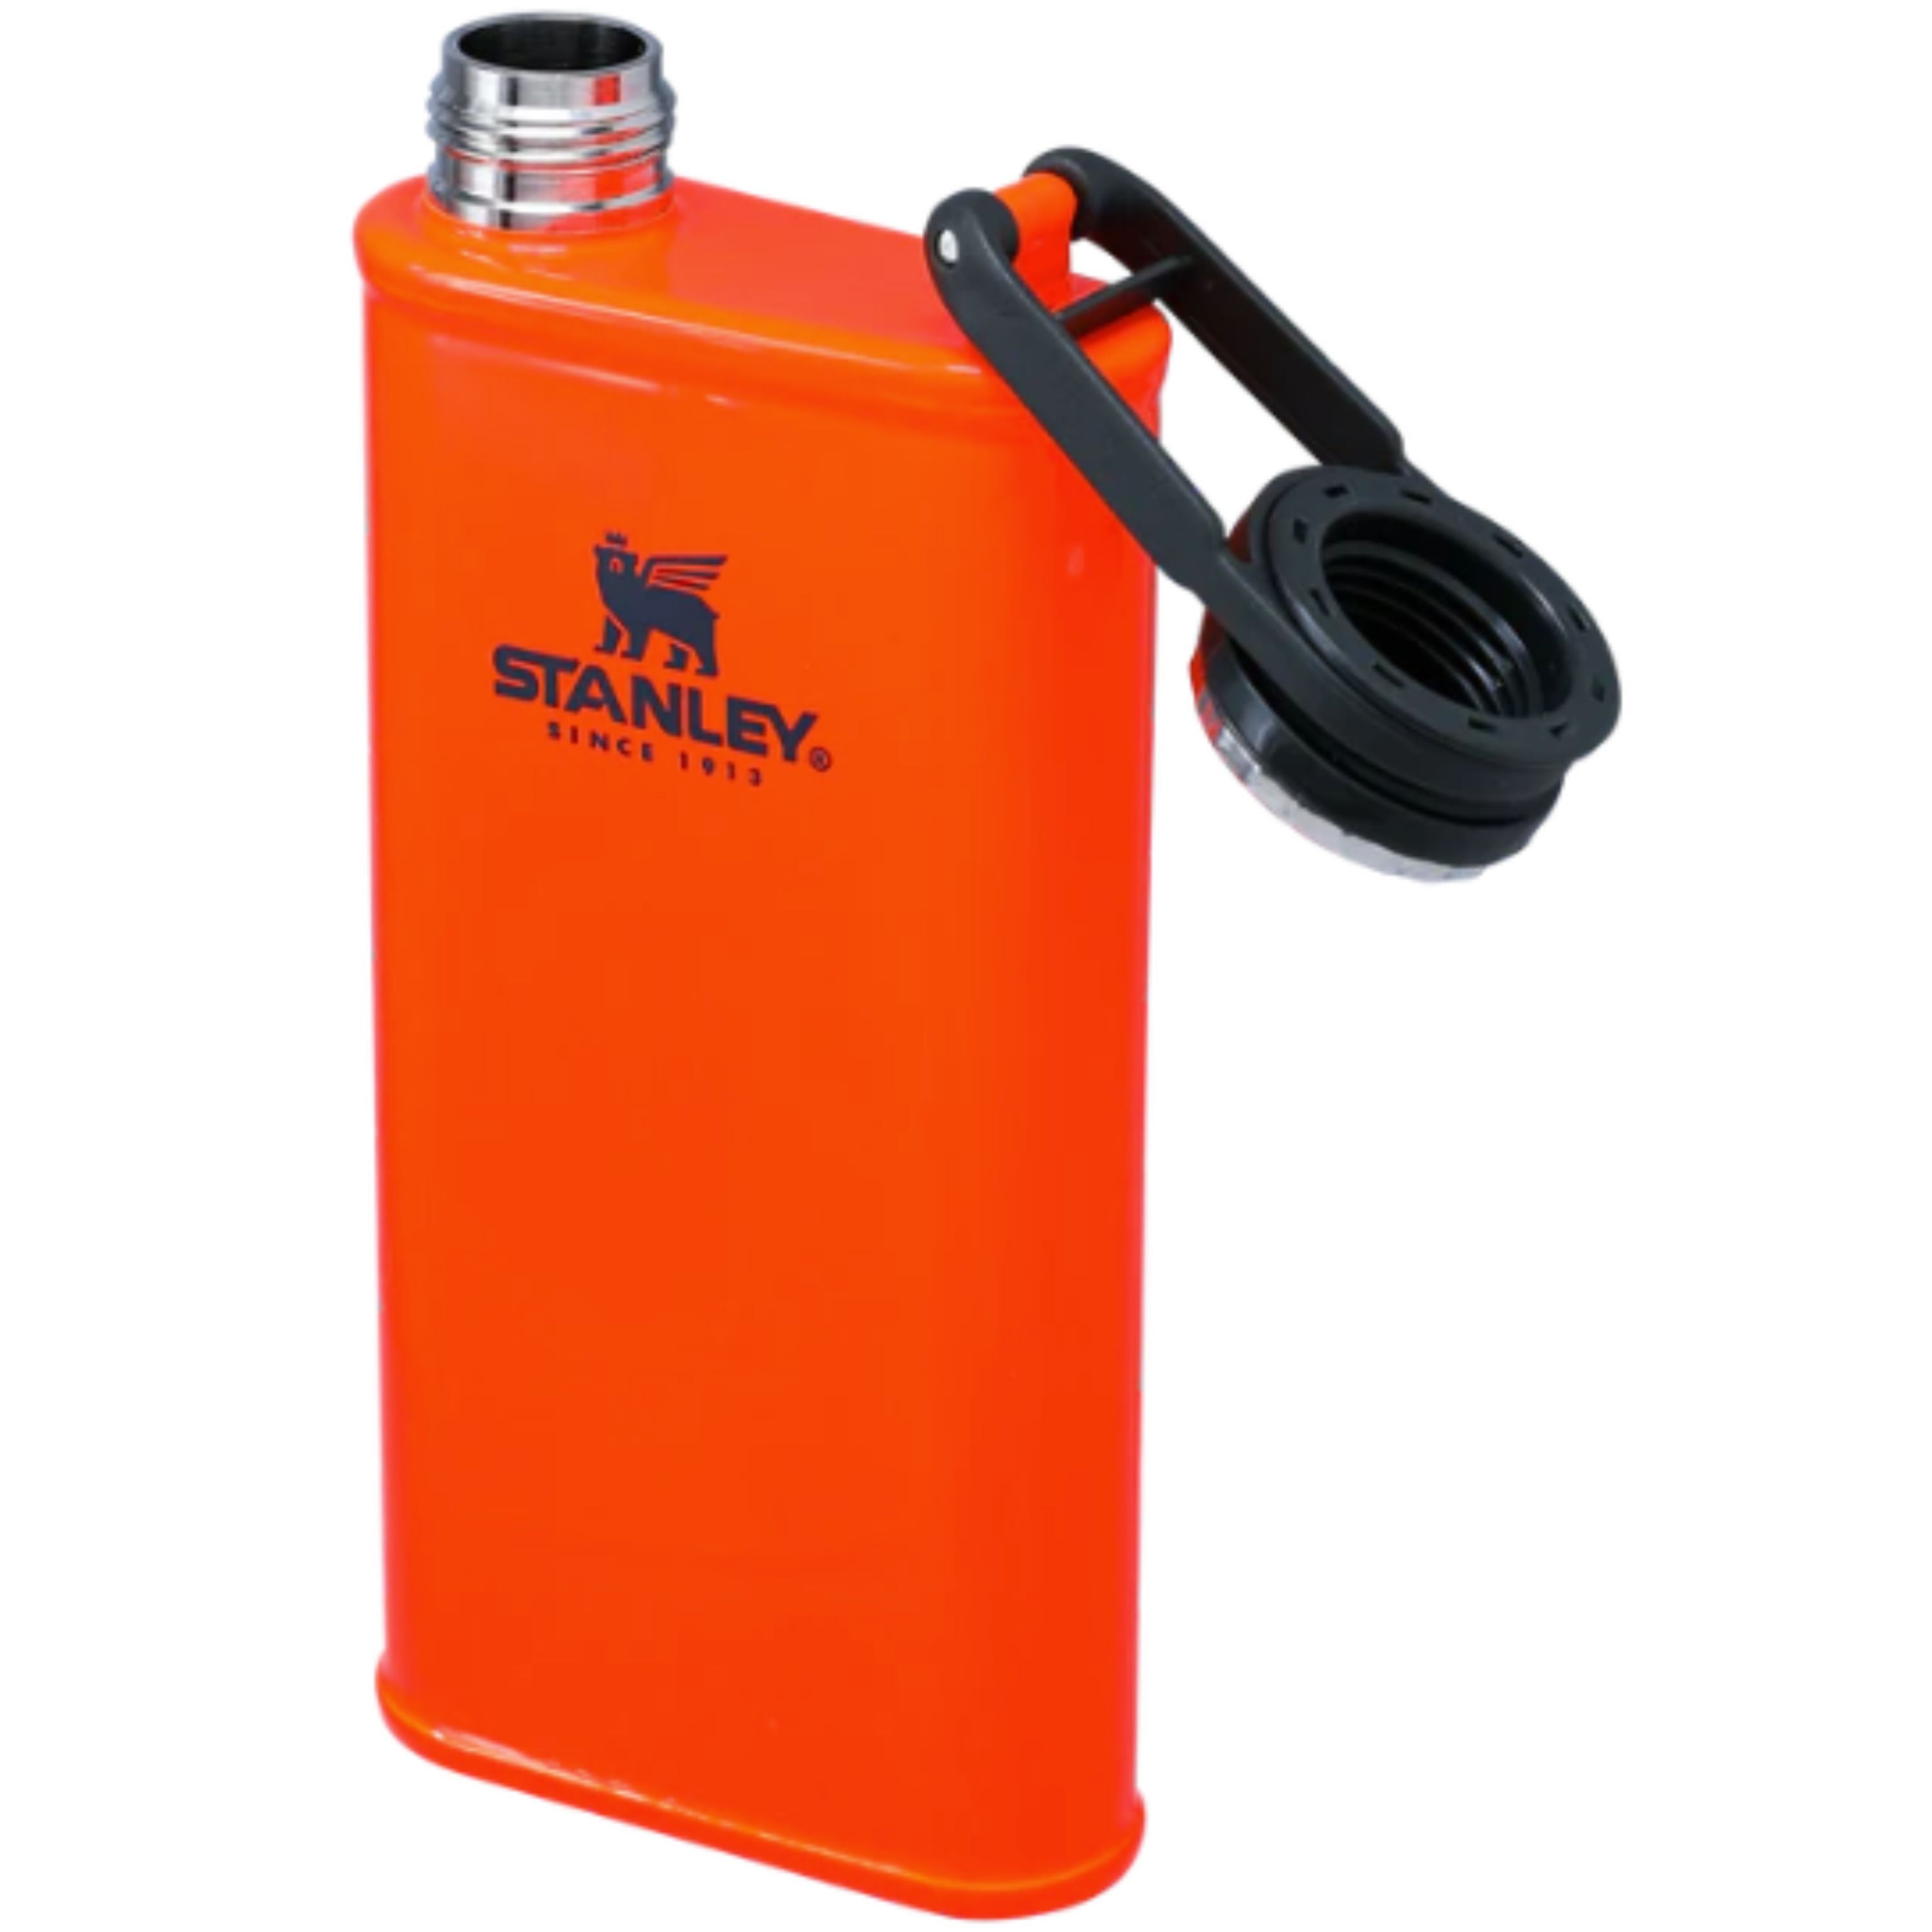 "The Easy Fill" Flask - Wide mouth